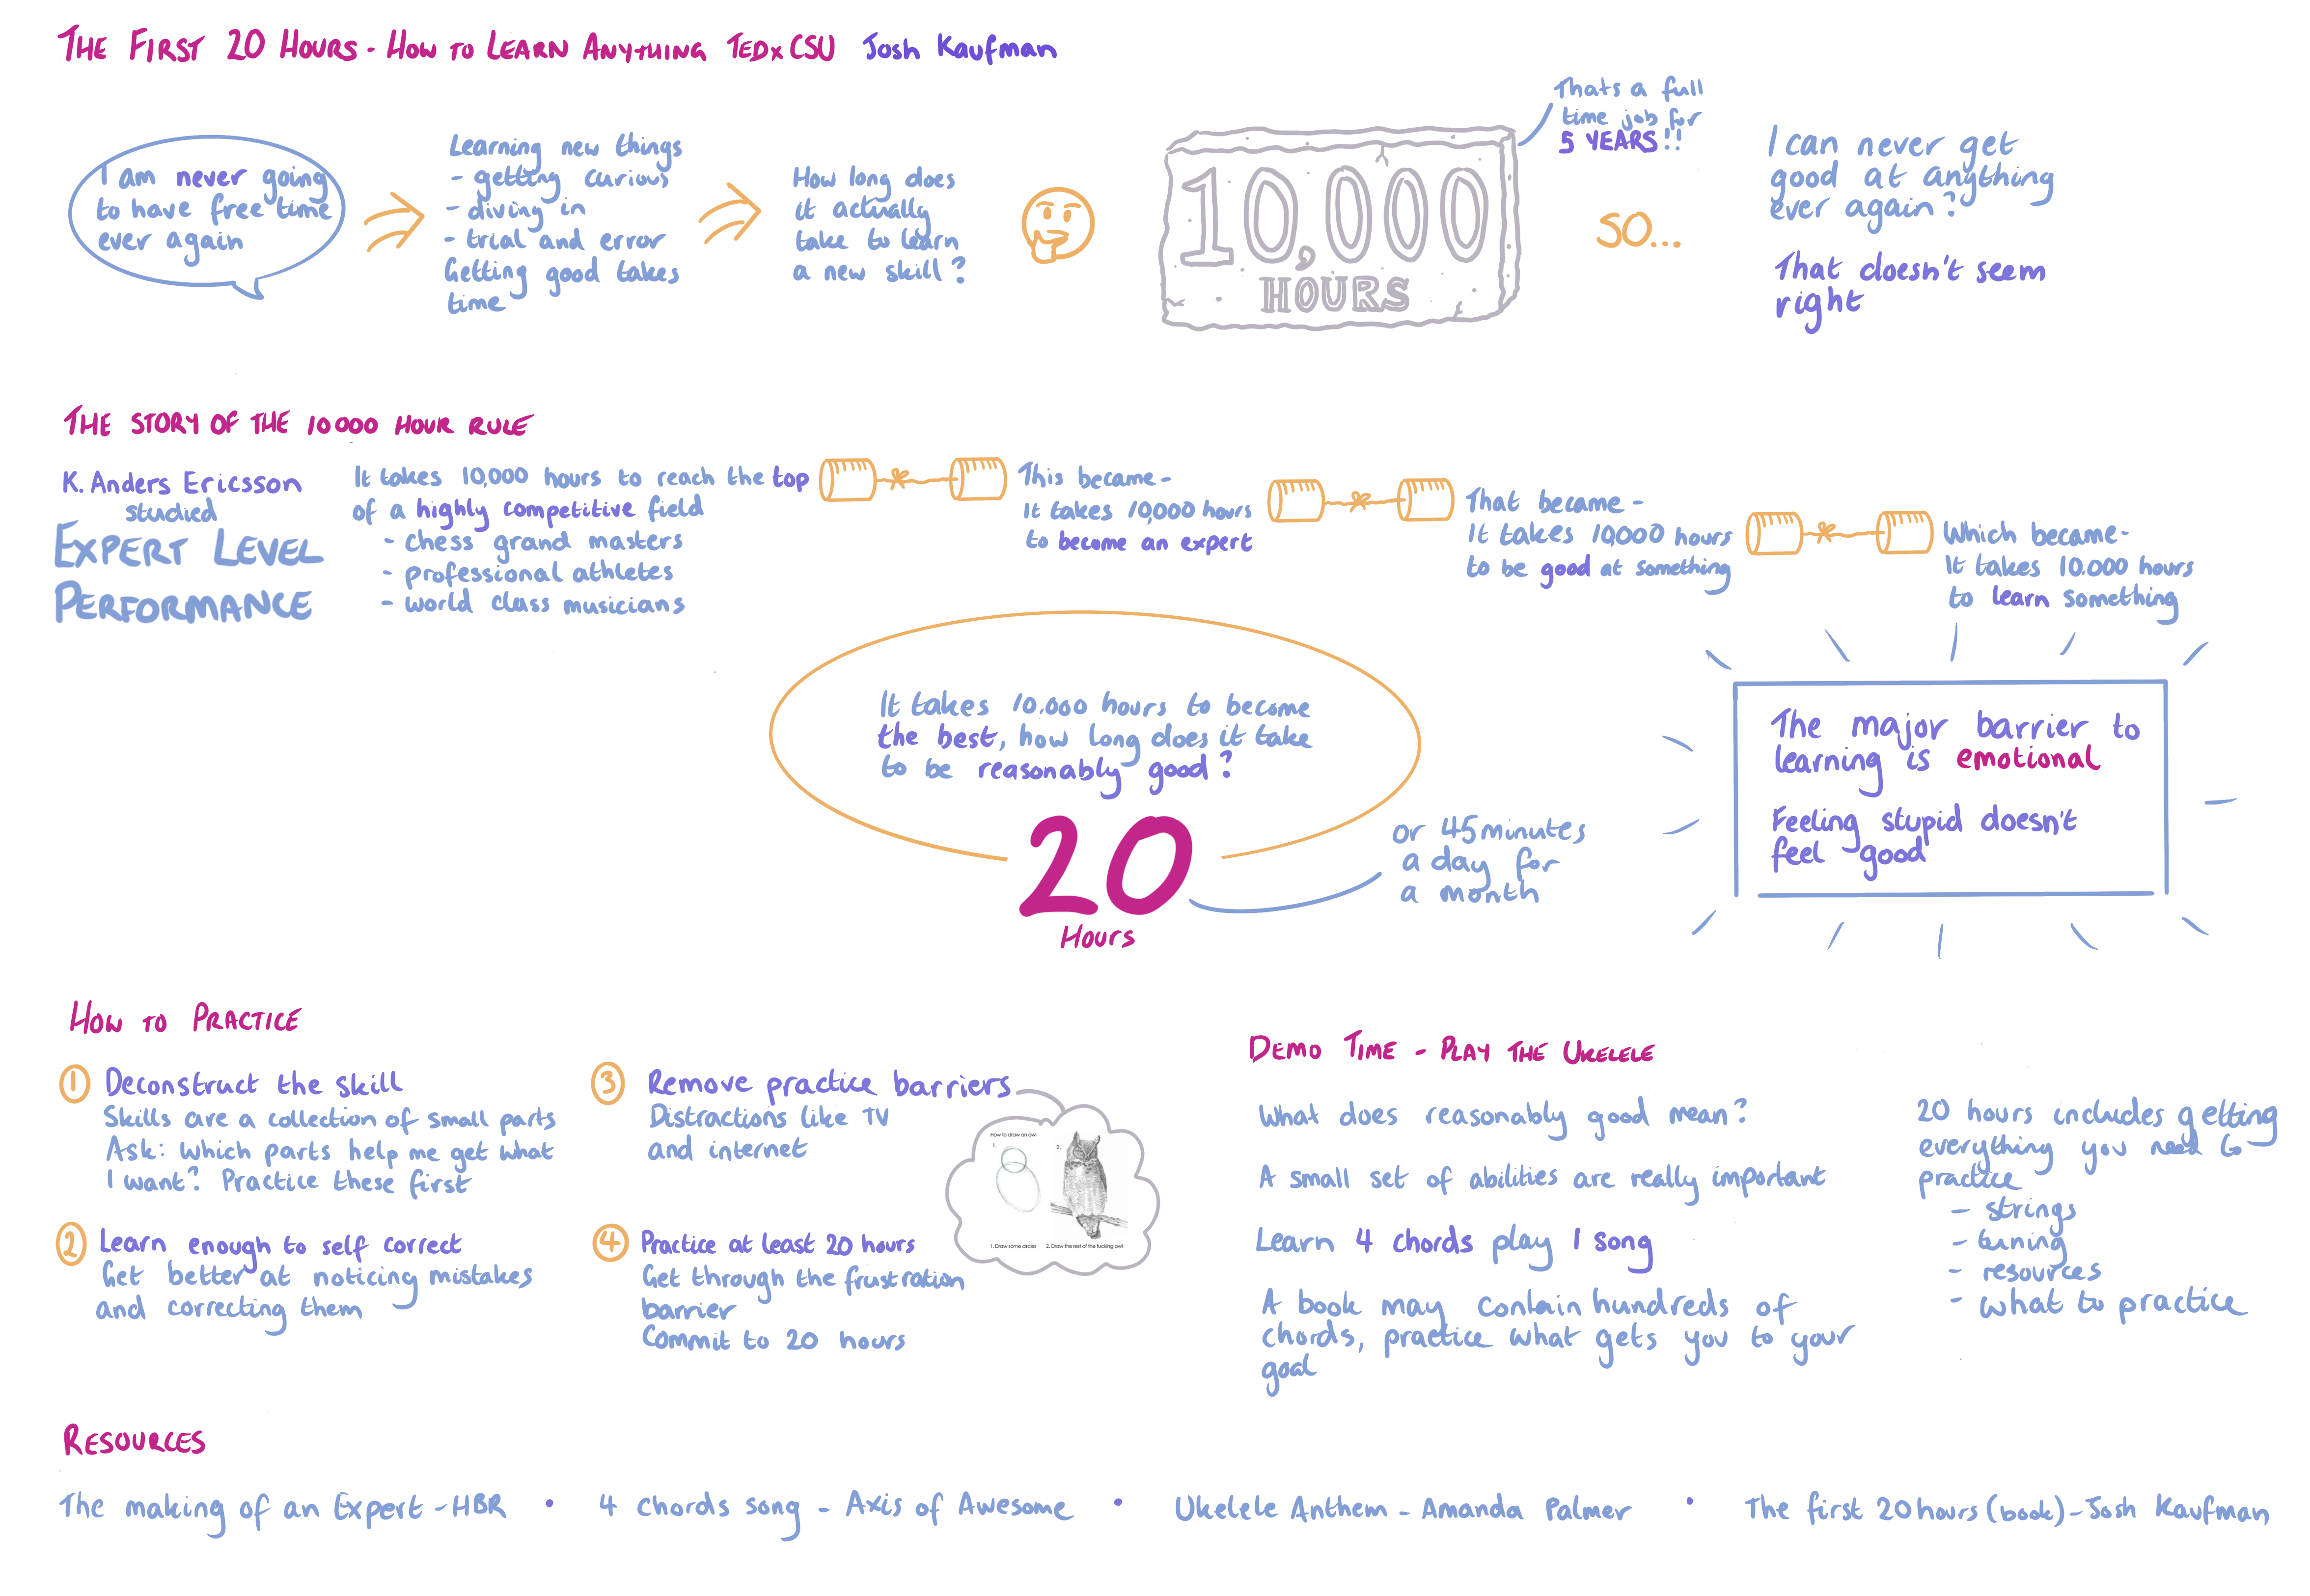 Notes for the first 20 hours TED talk